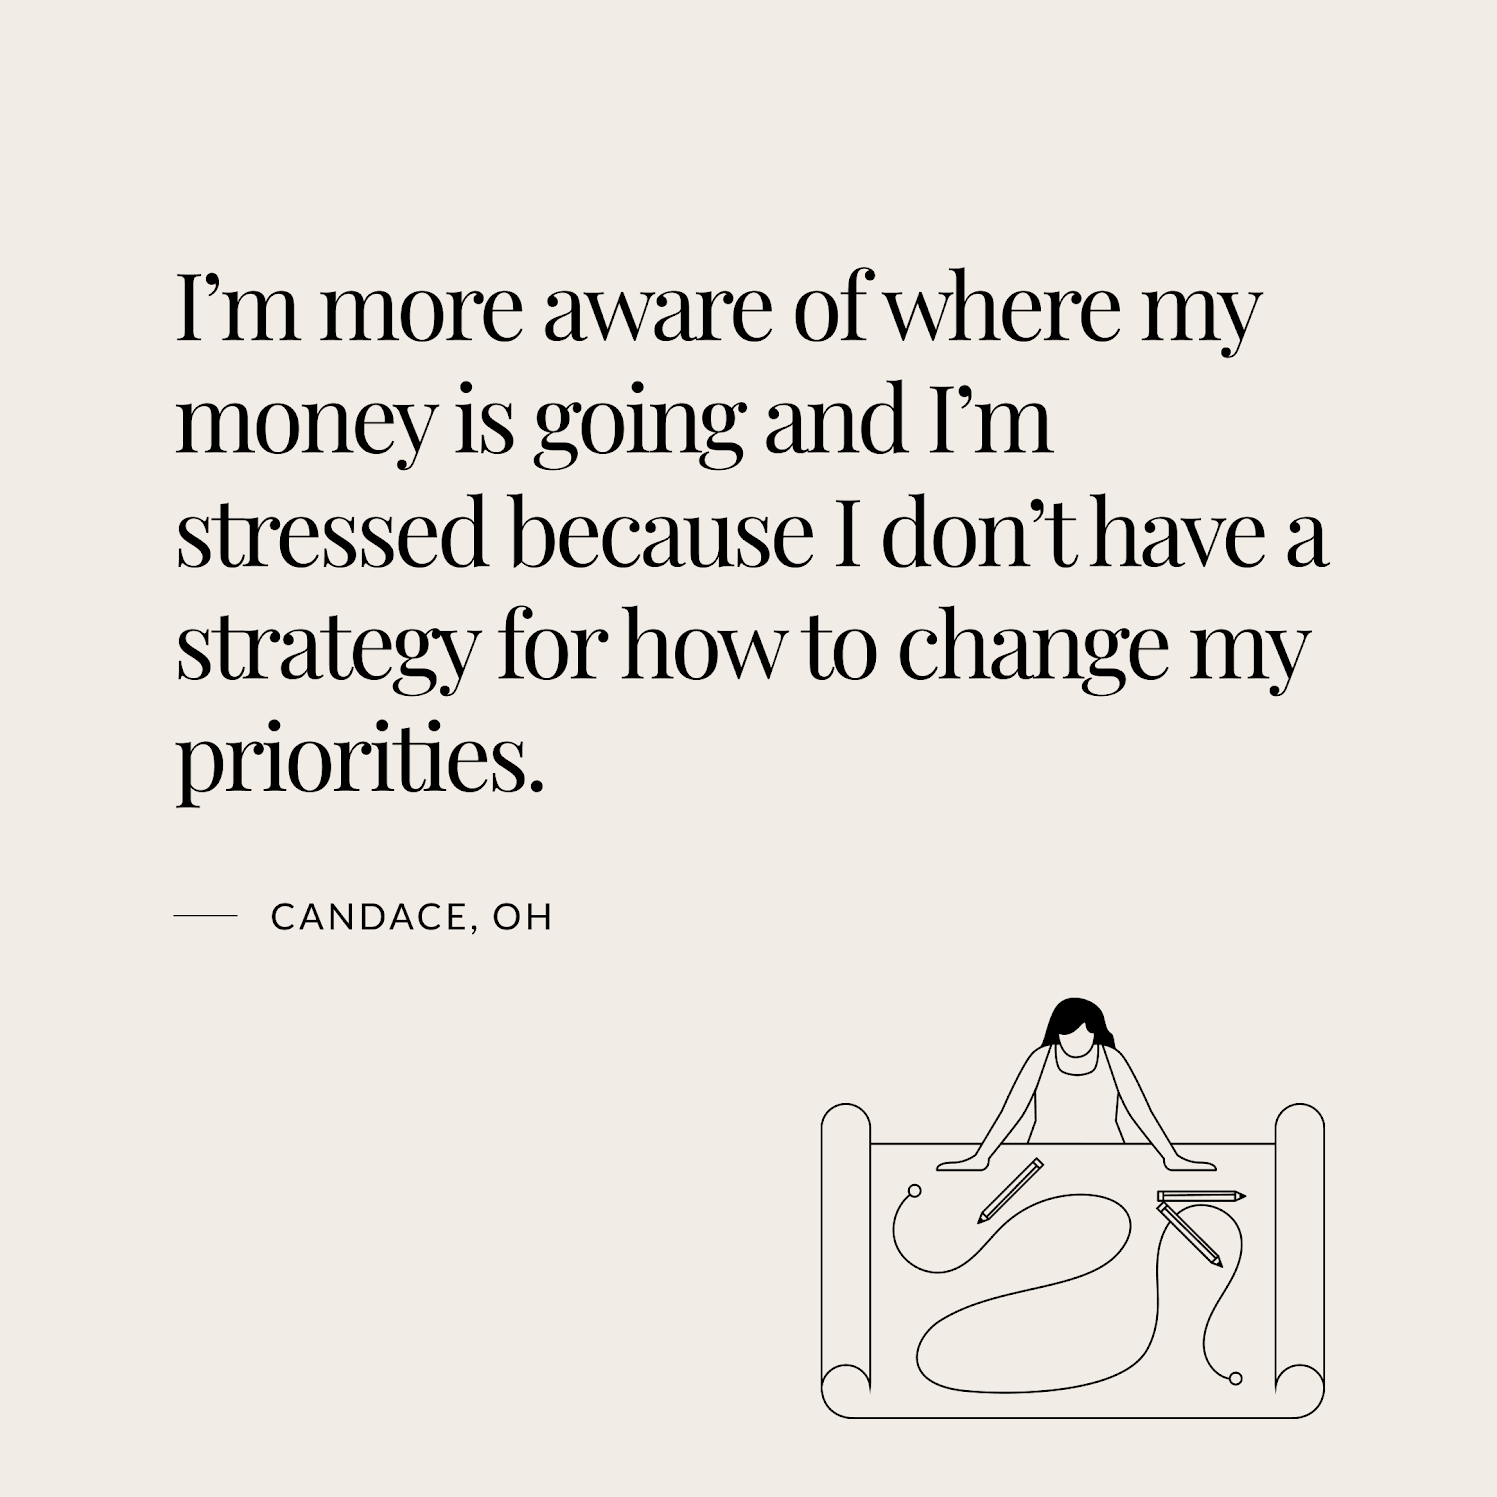 A quote from survey respondent Candace saying she's more aware of money but stressed about her priorities.